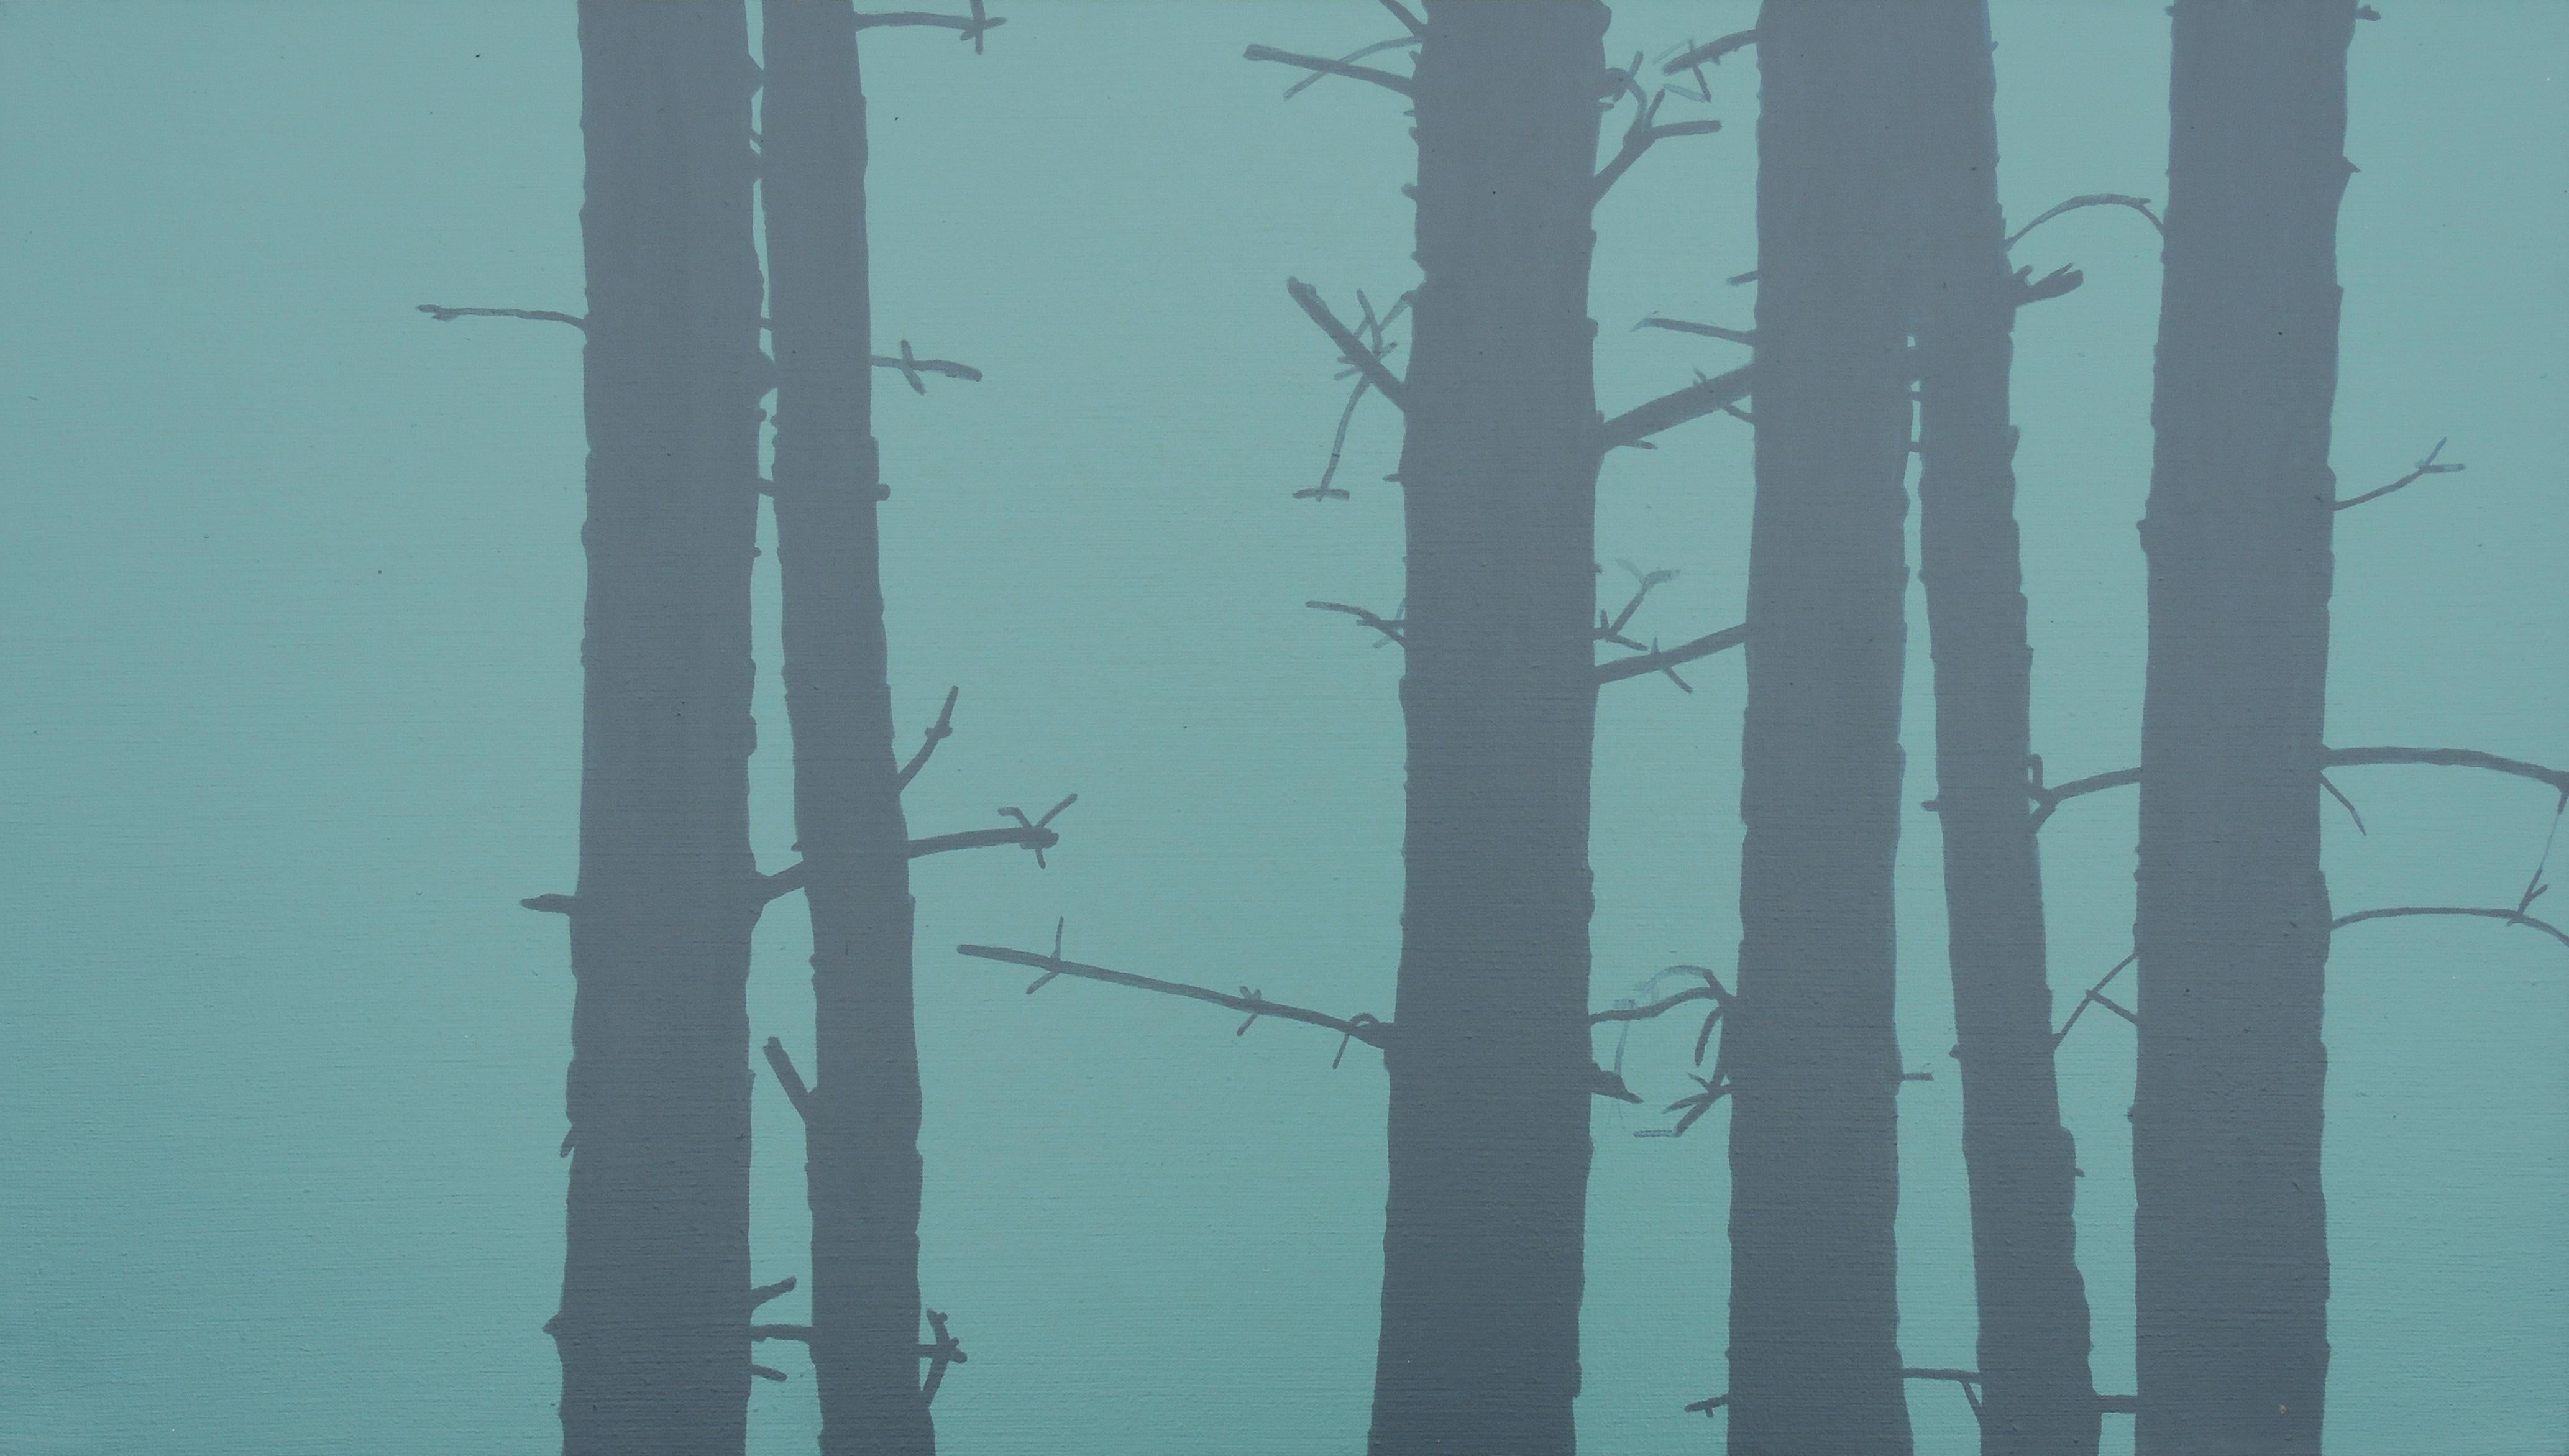 Trees 23 June 16:22, Modern Landscape Painting, Minimalistic, Abstract, Forest